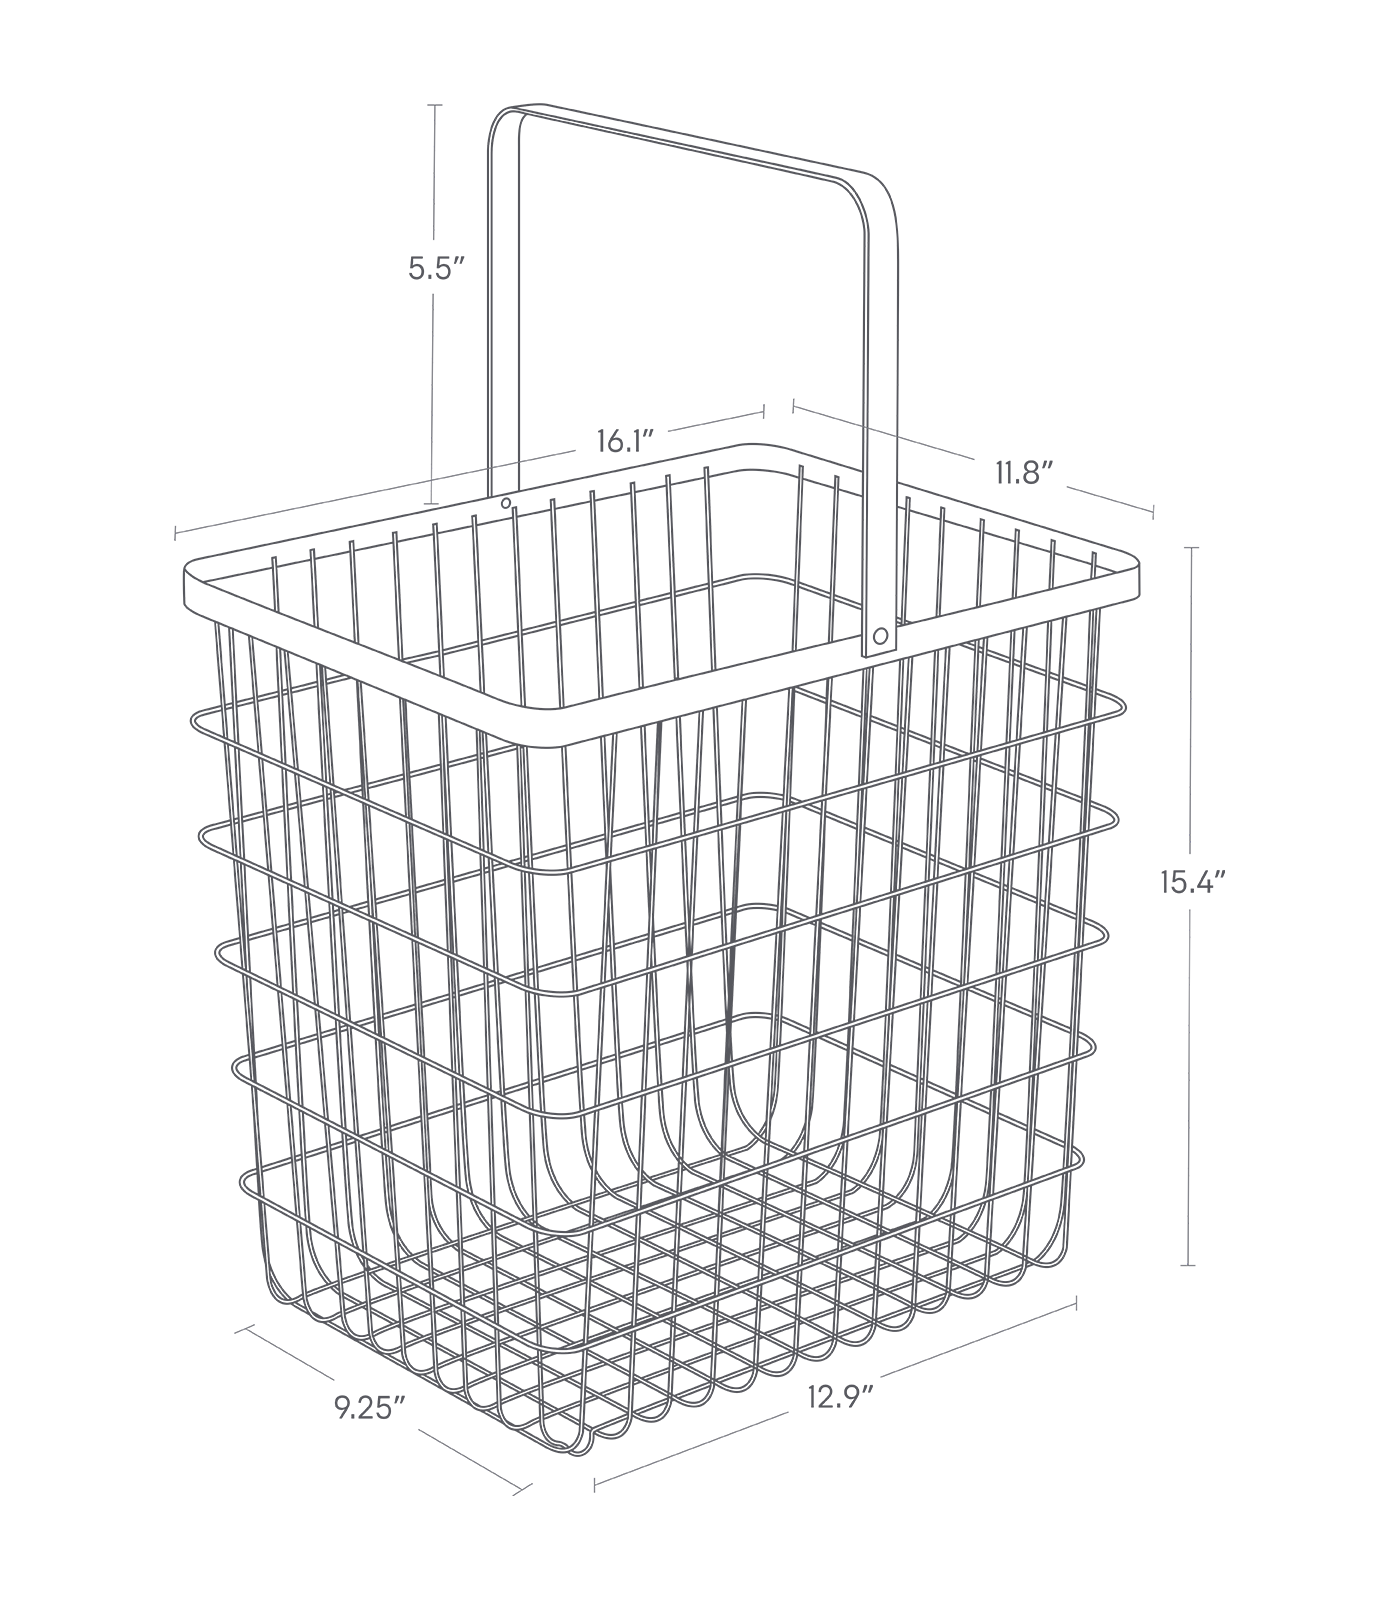 Dimension image for Wire Basket on a white background including dimensions  L 11.81 x W 16.14 x H 15.35 inches